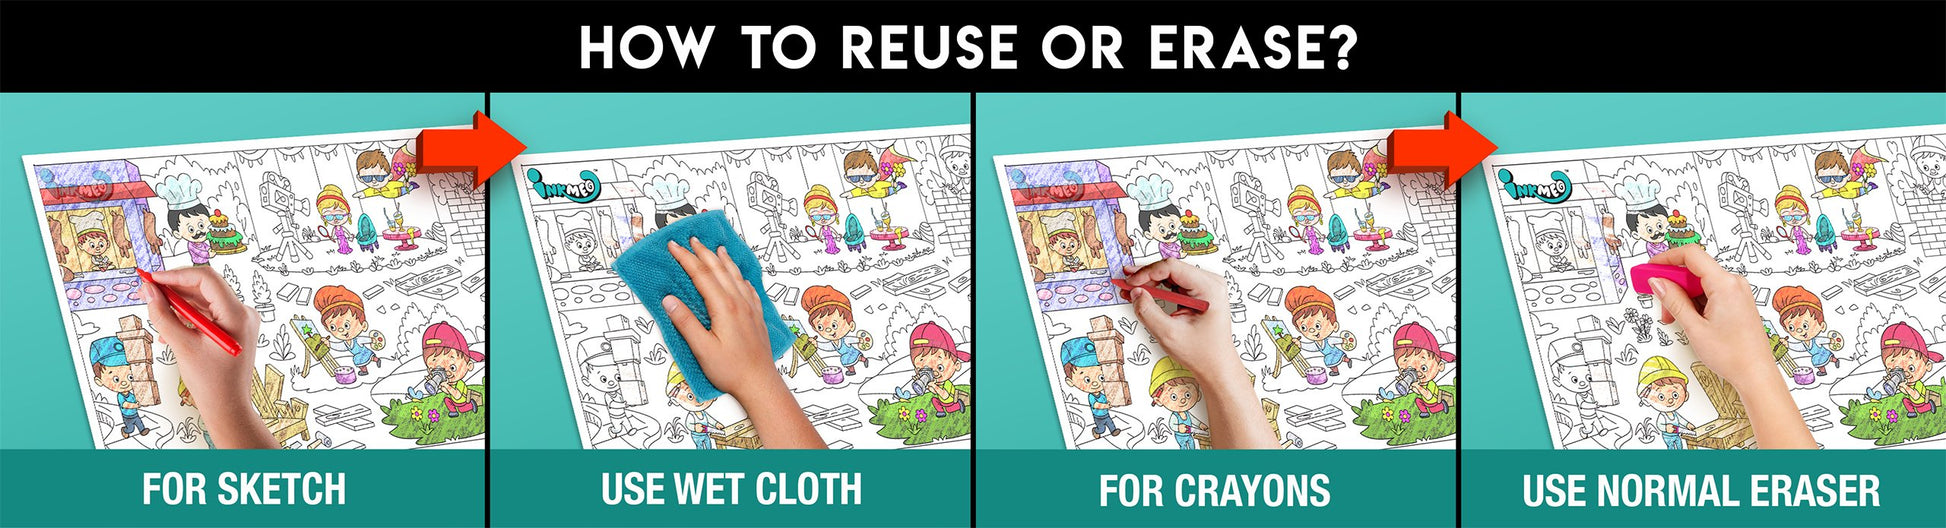 The image has a green background with four pictures demonstrating how to reuse or erase: the first picture depicts sketching on the occupation sheet, the second shows using a wet cloth to remove sketches, the third image displays crayons colouring on the occupation sheet, and the fourth image illustrates erasing crayons with a regular eraser.